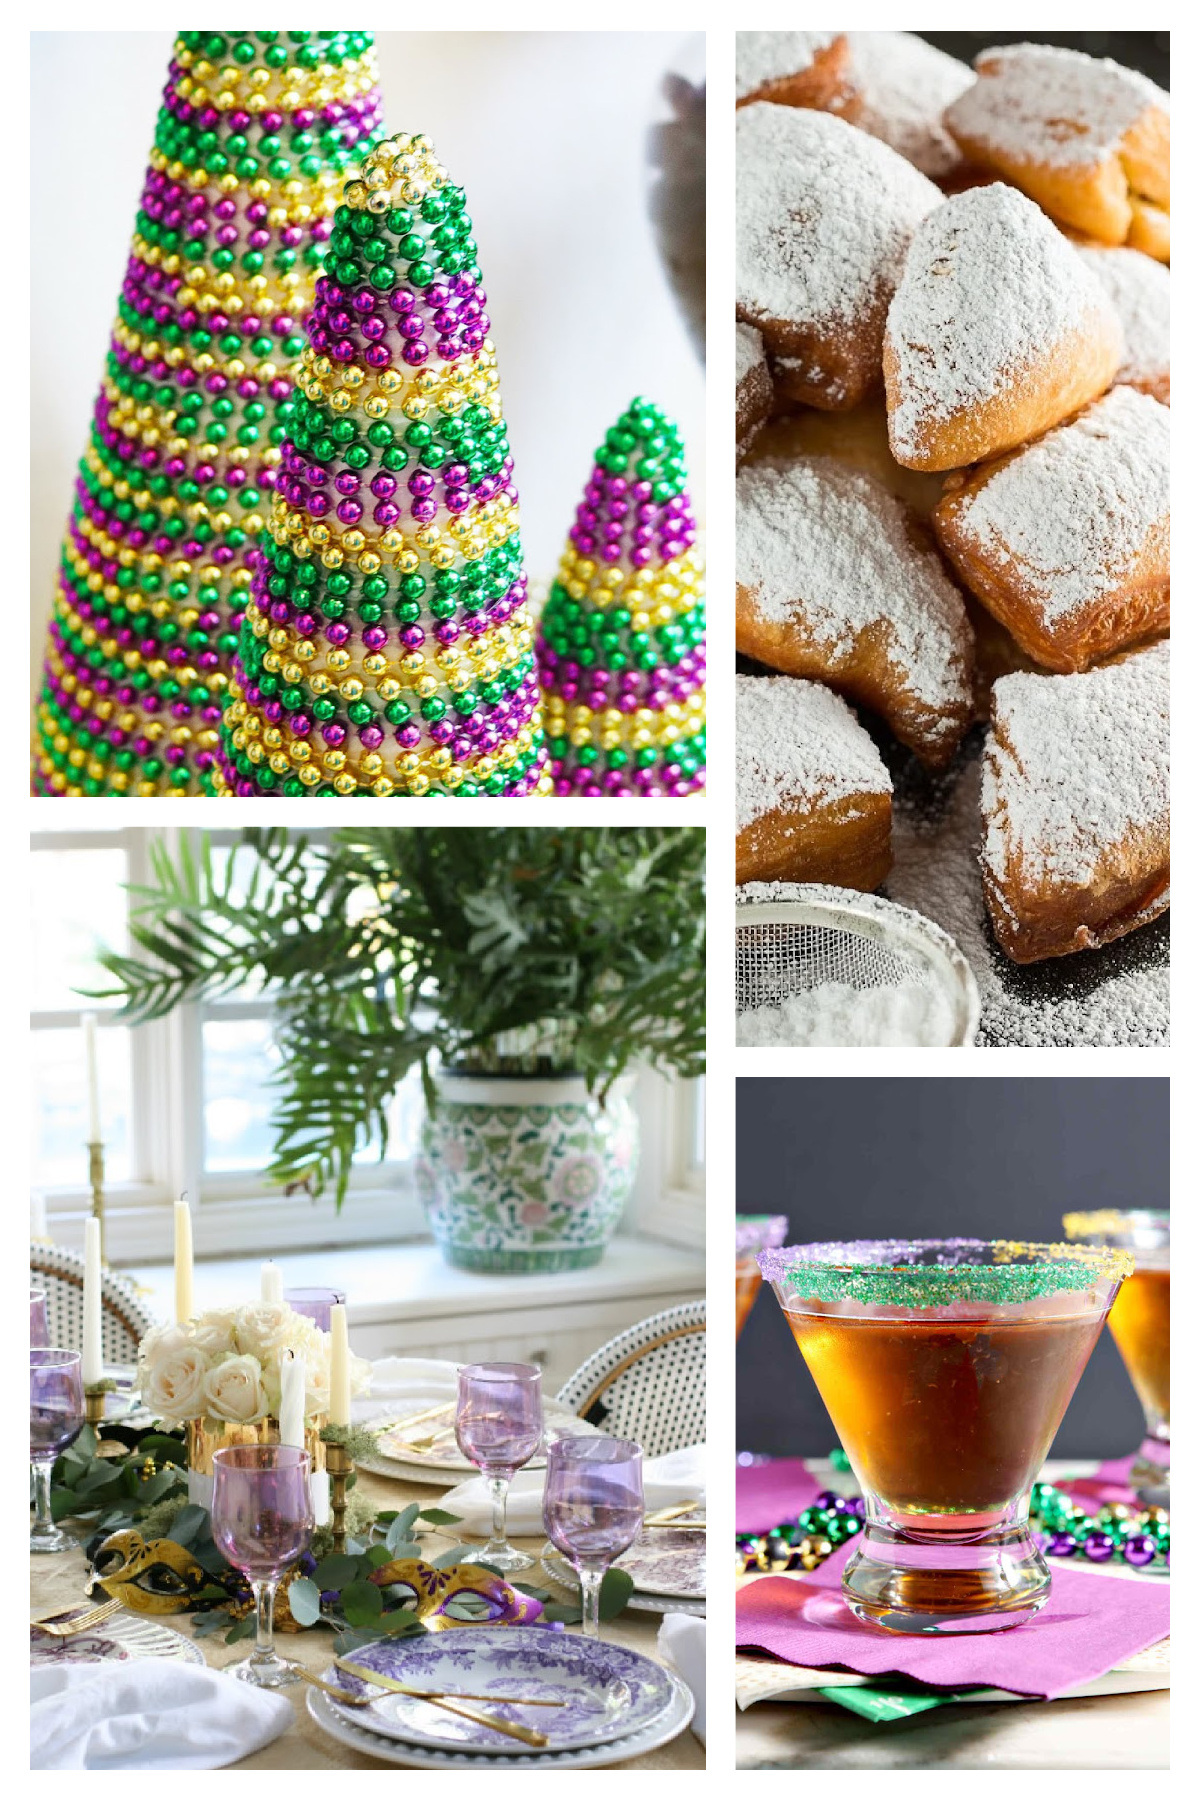 21 Awesome Mardi Gras Party Ideas - Bluesky at Home